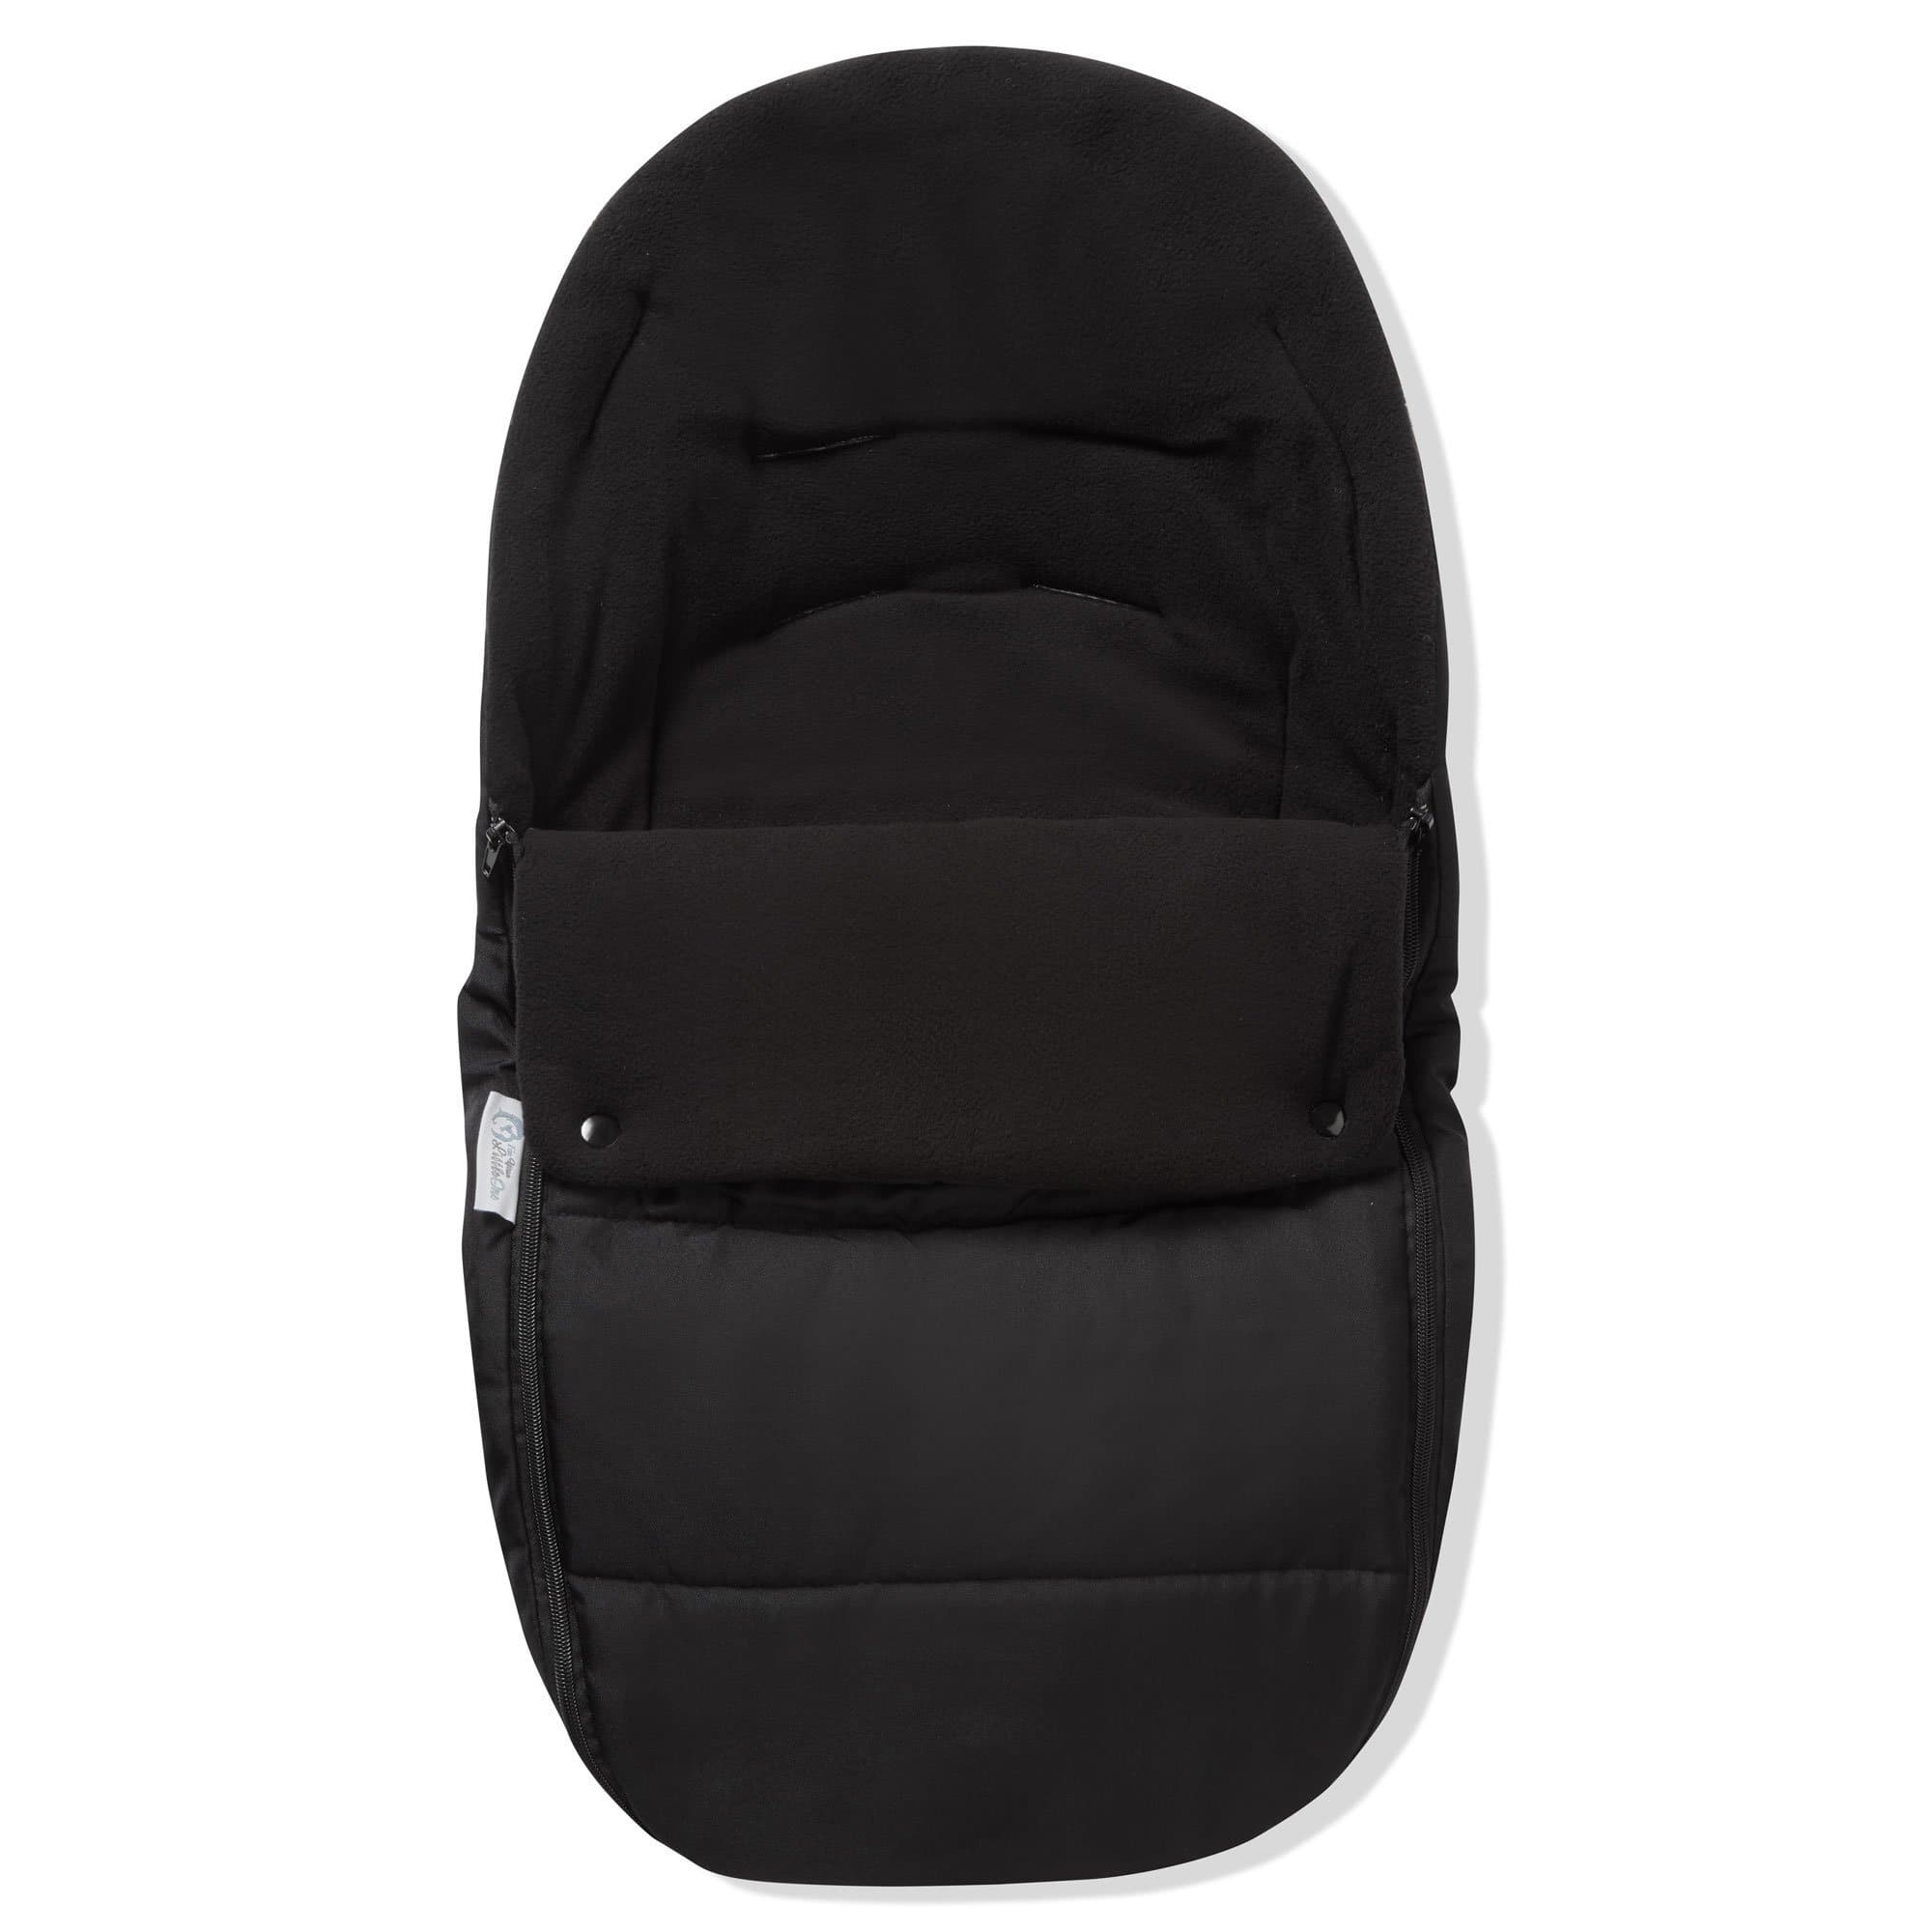 Premium Car Seat Footmuff / Cosy Toes Compatible with Ickle Bubba - Black Jack / Fits All Models | For Your Little One